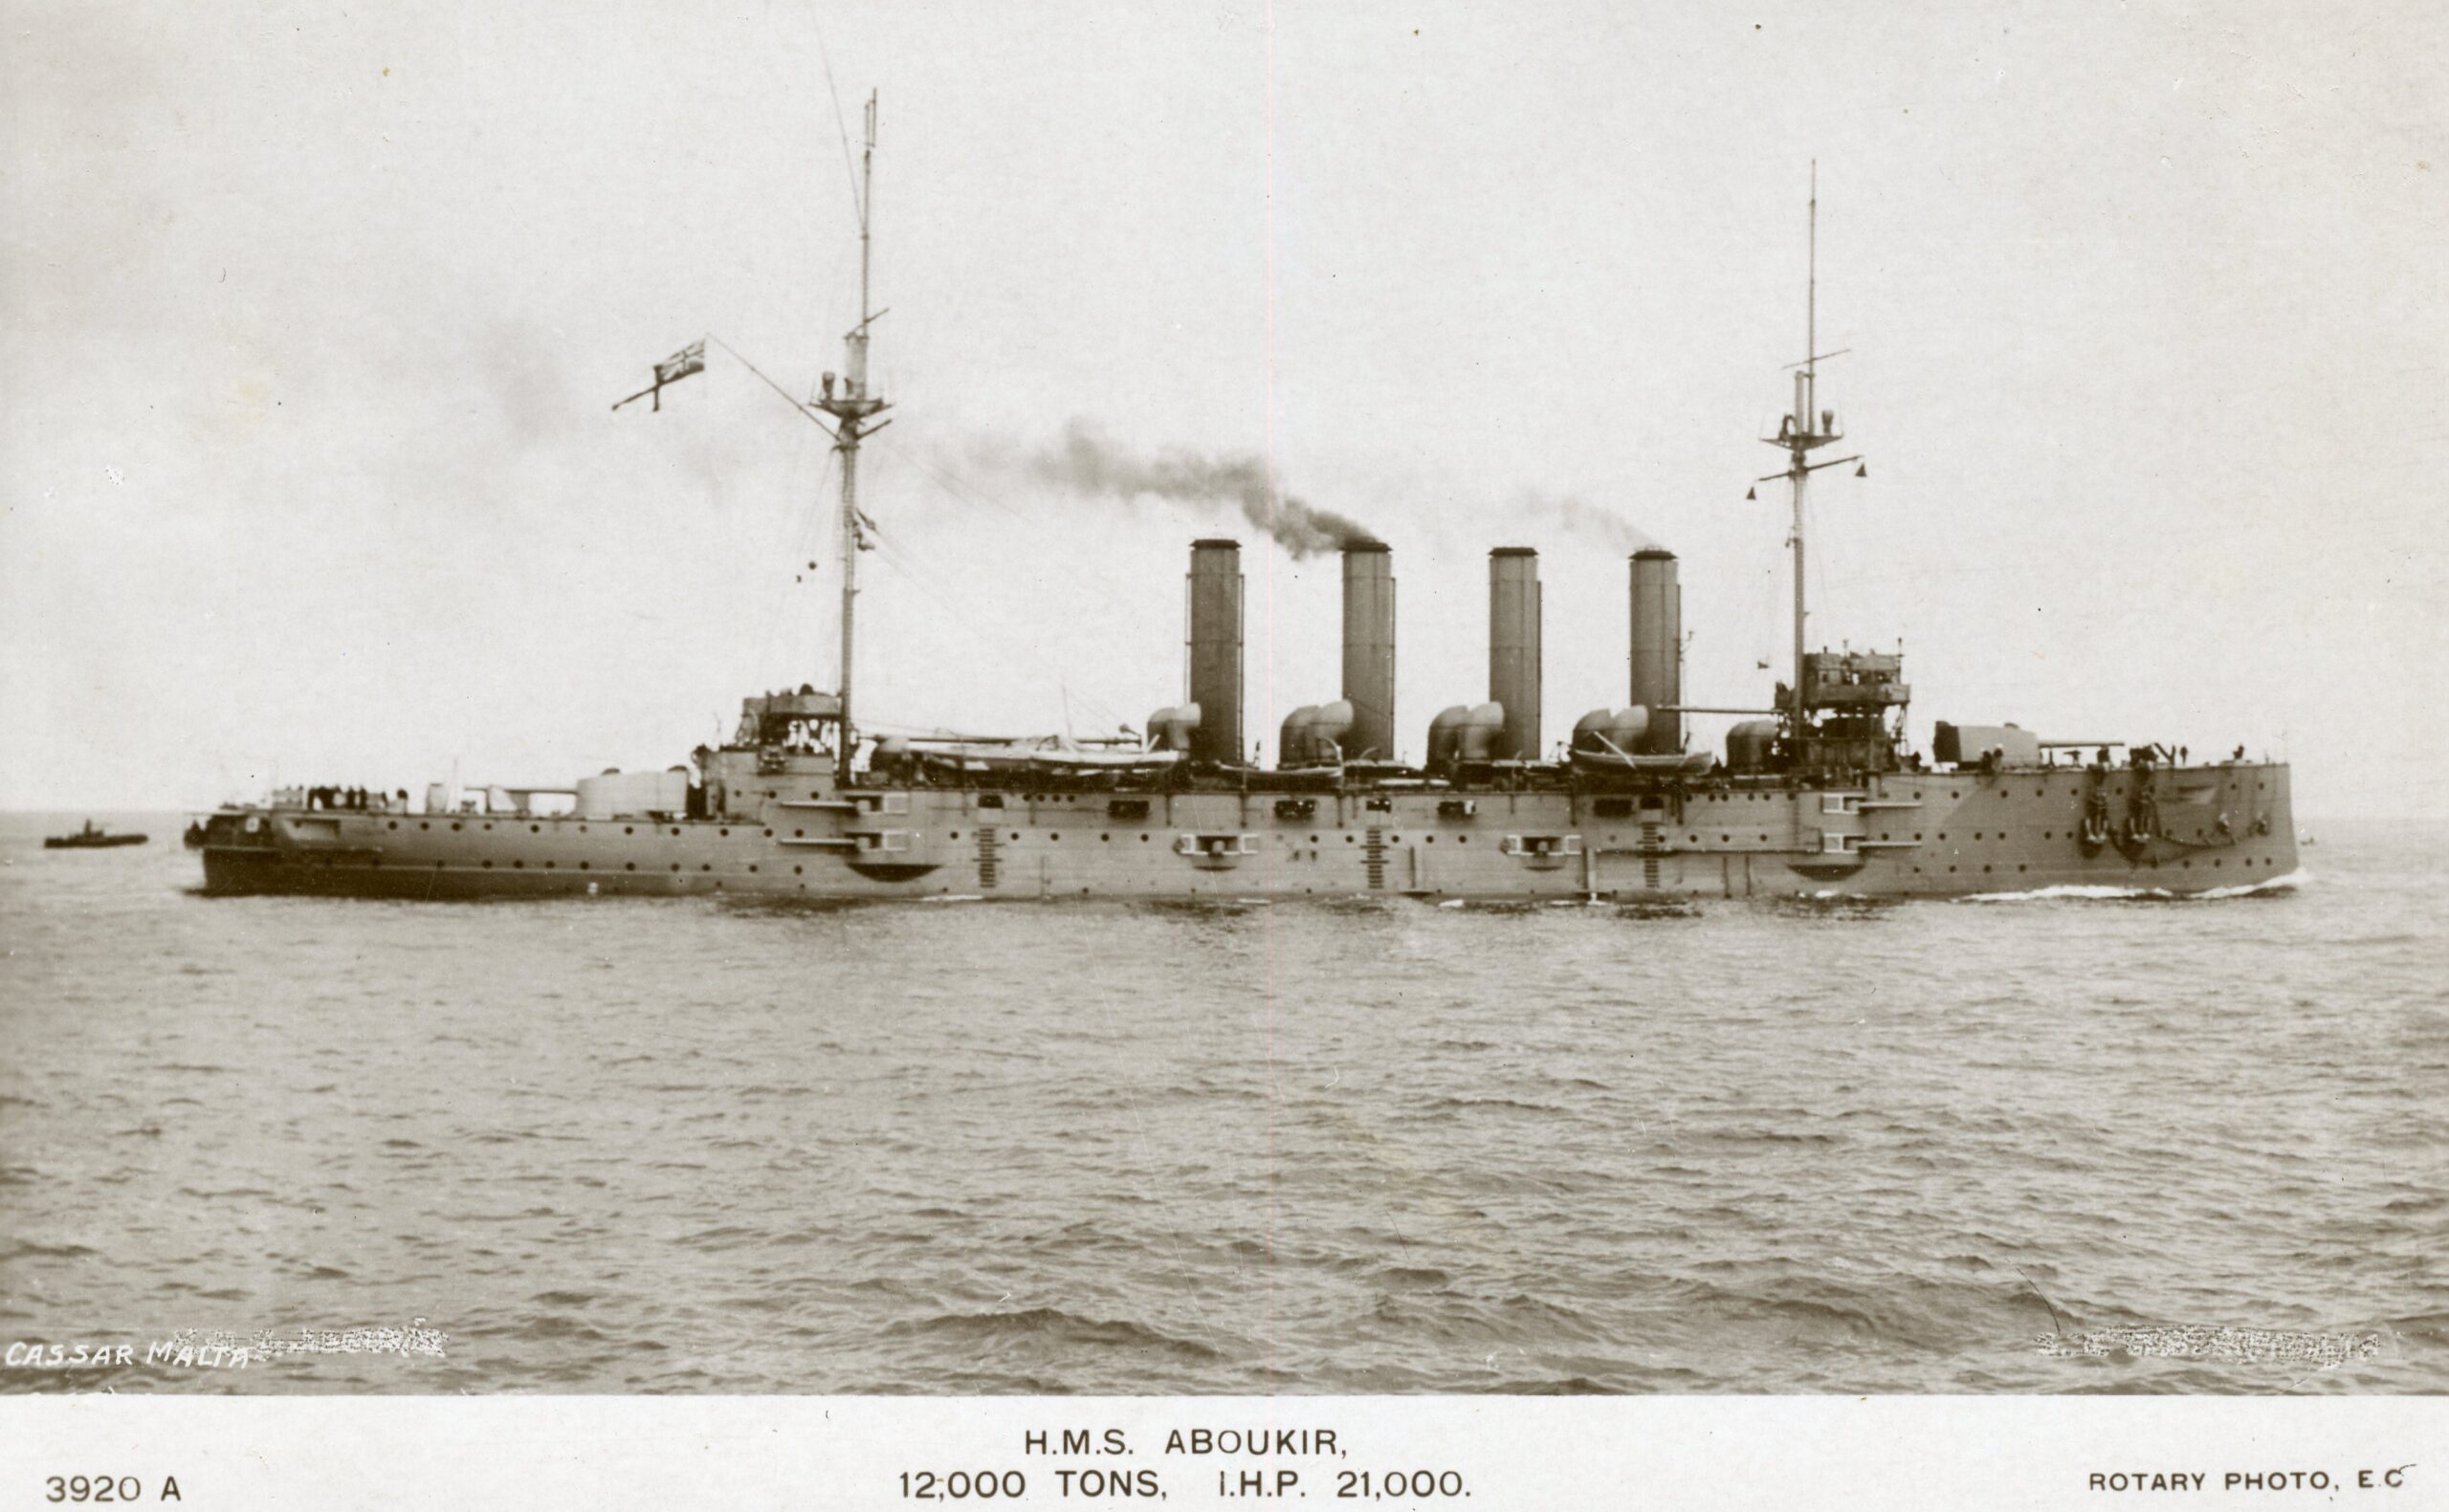 H.M.S. Aboukir<br>Author's Collection